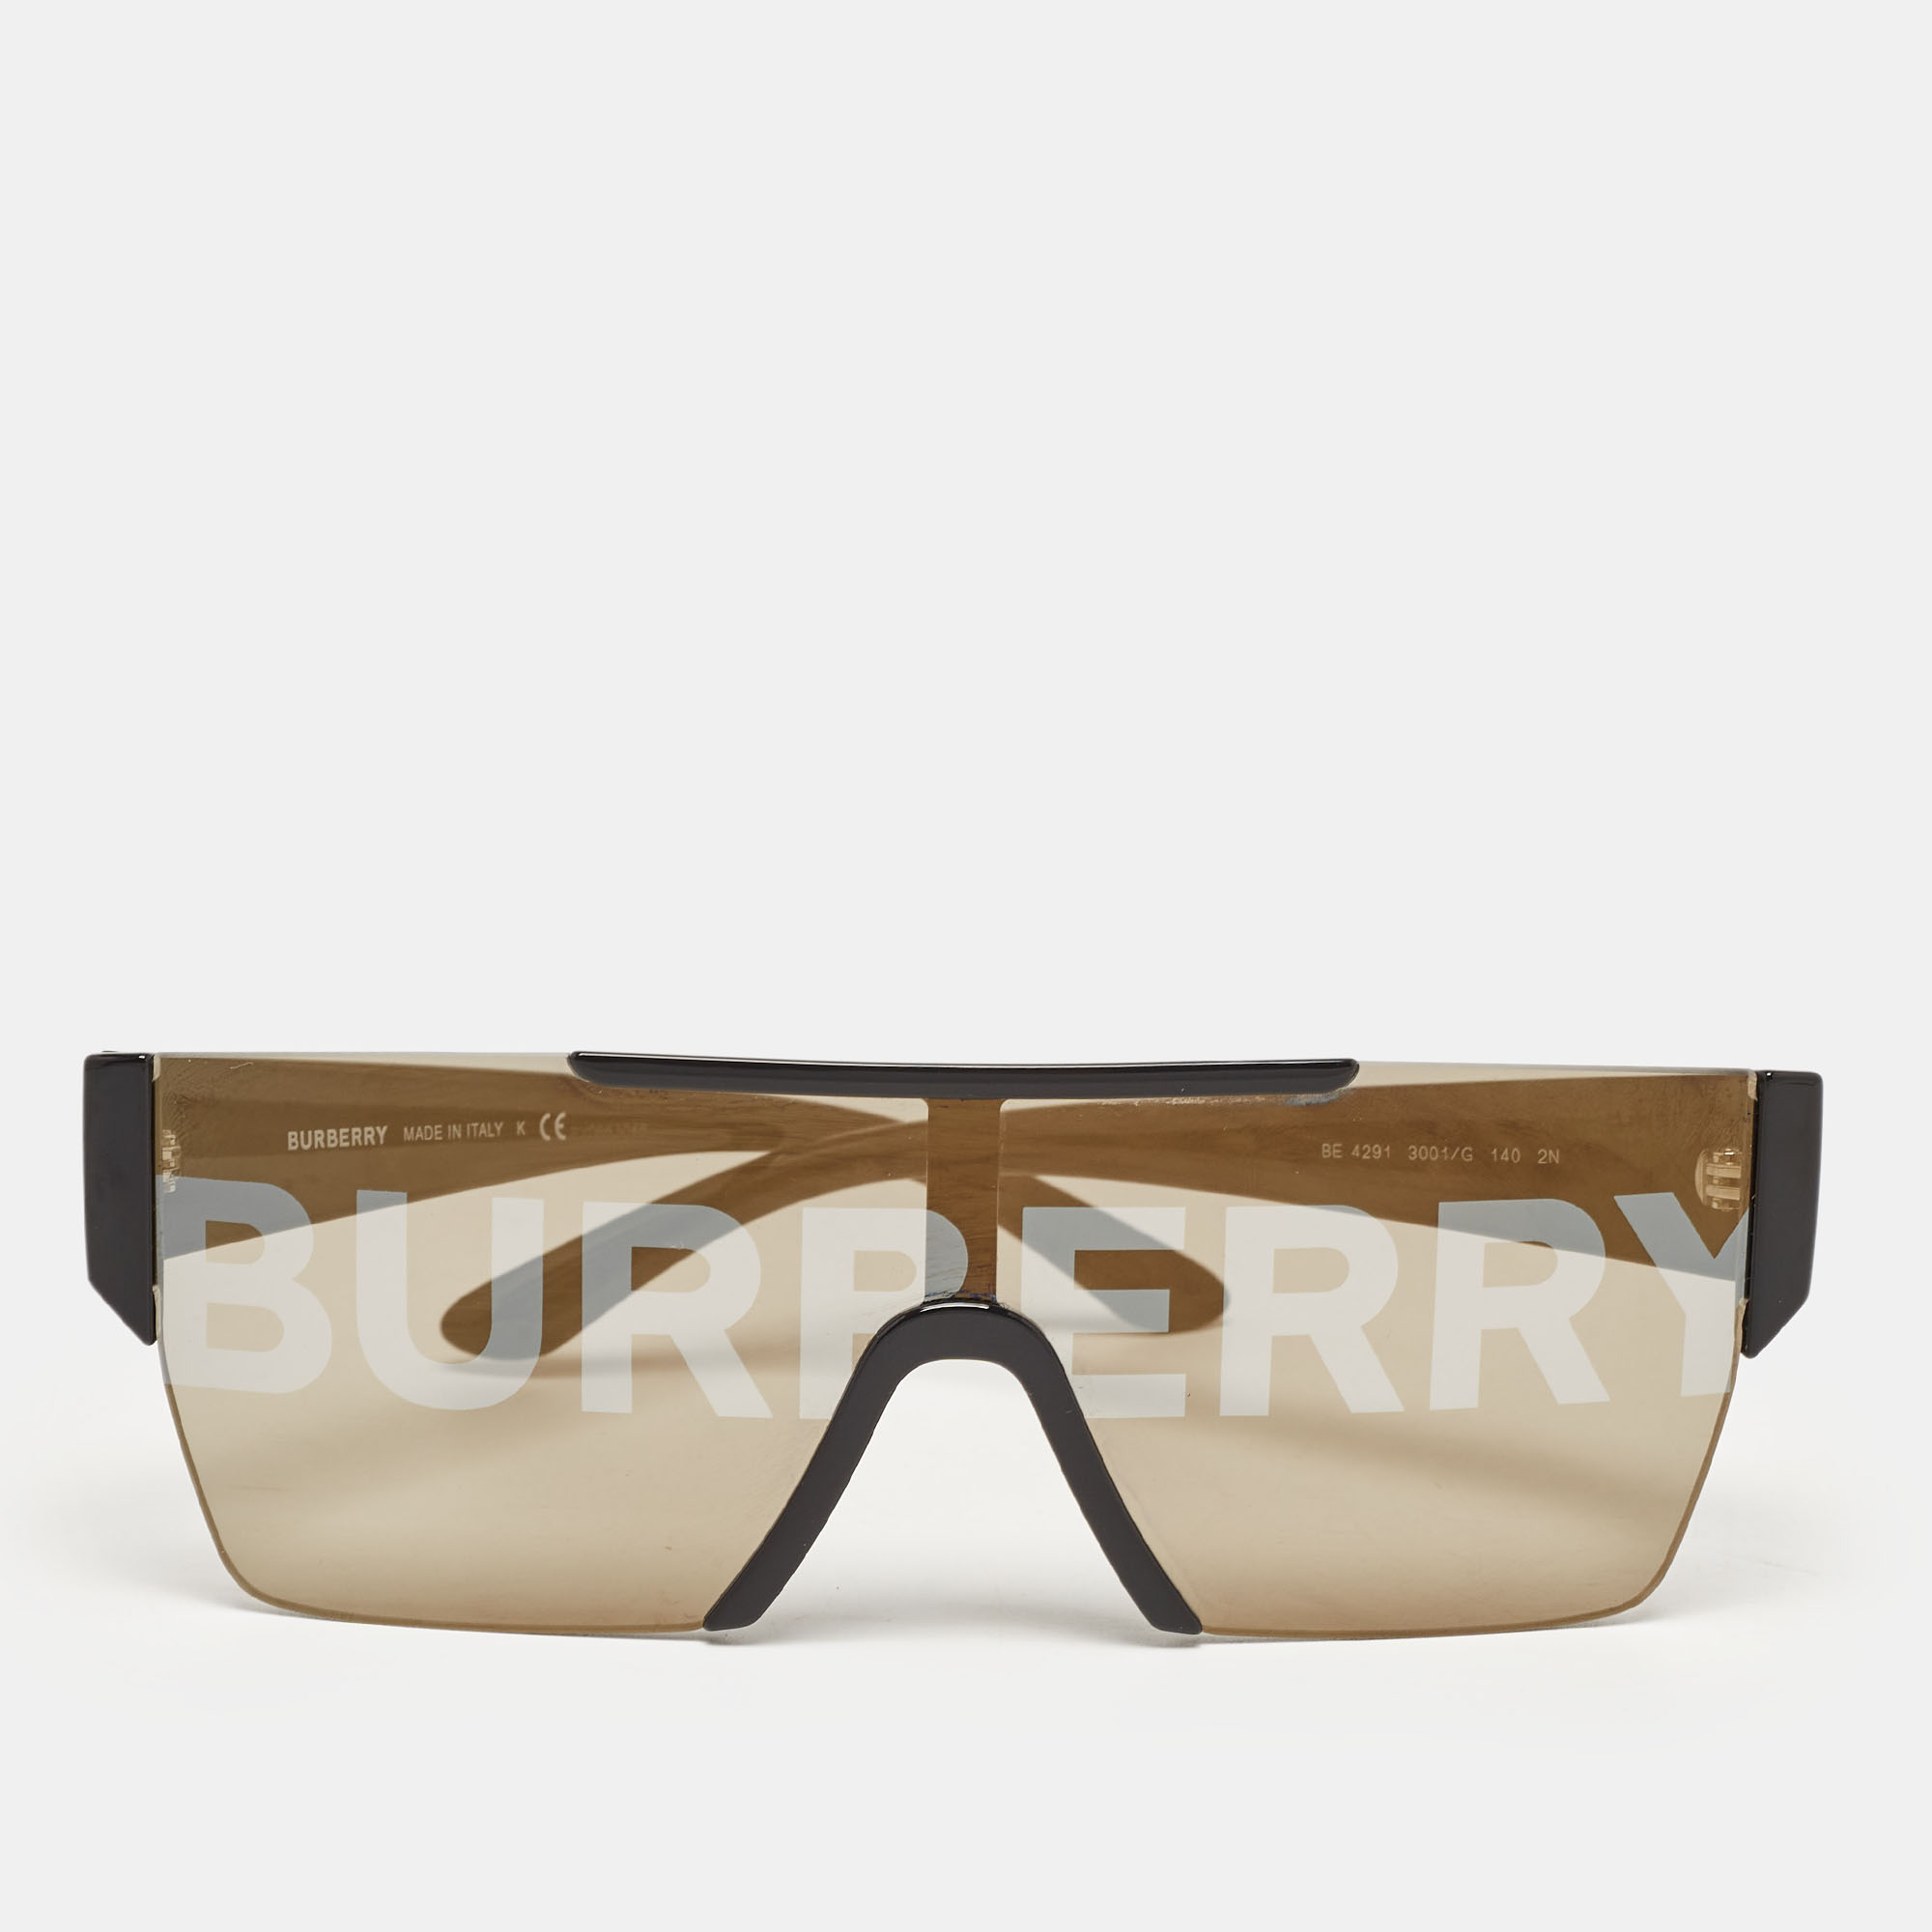 Elevate your eyewear game with these Burberry sunglasses. Meticulously crafted from premium materials they offer unparalleled protection and a timeless design making them a must have accessory for the fashion forward.